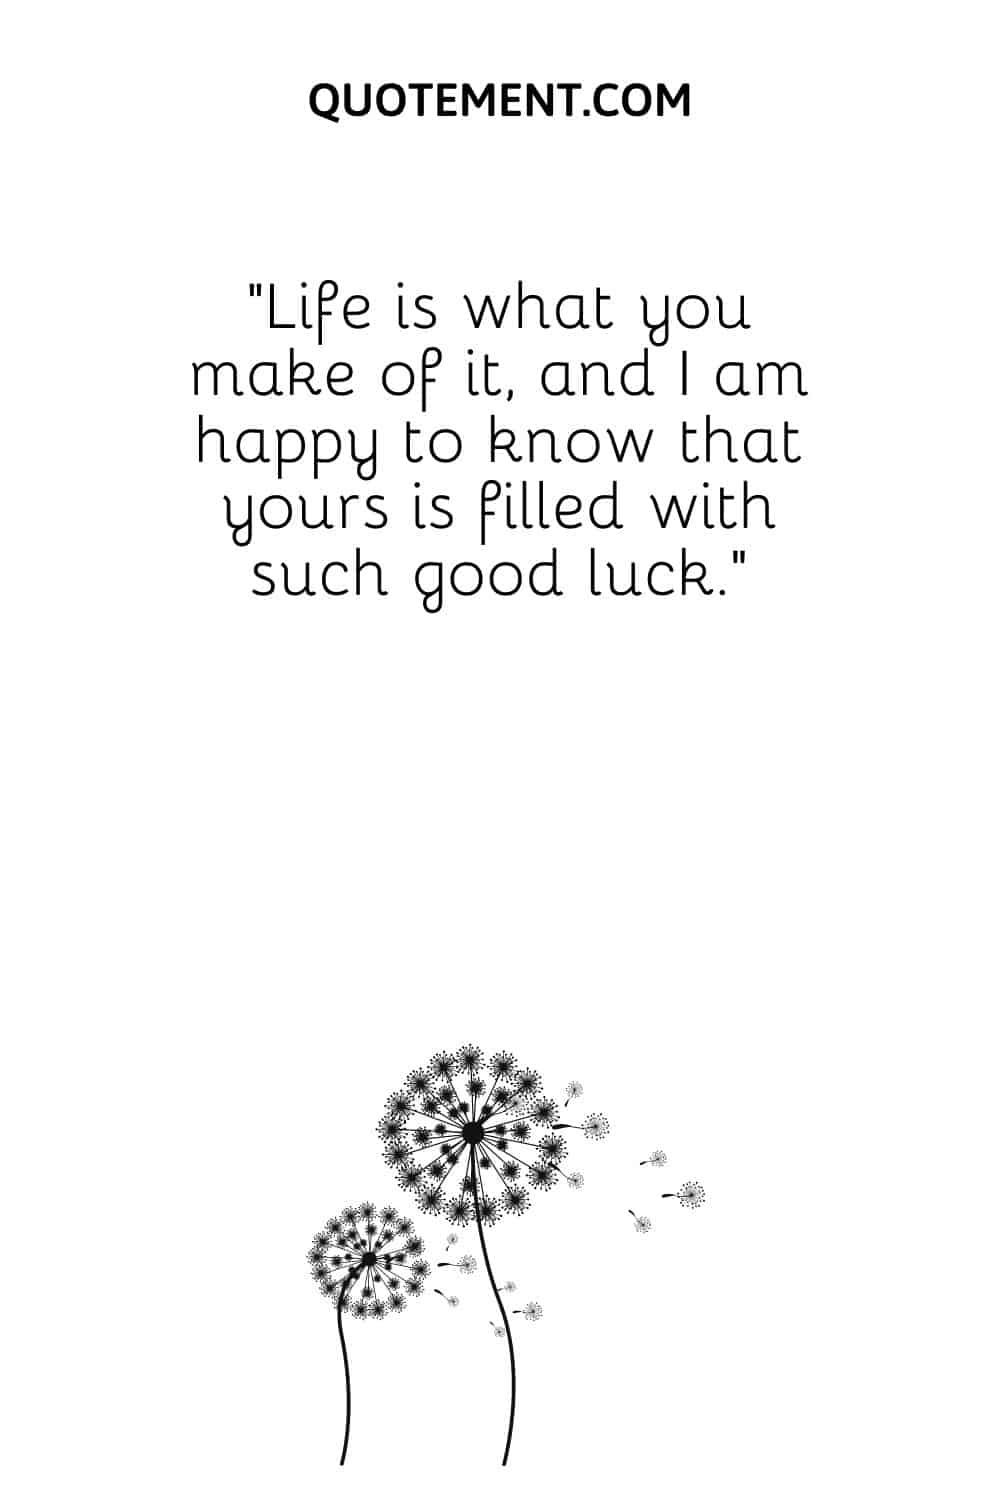 Life is what you make of it, and I am happy to know that yours is filled with such good luck